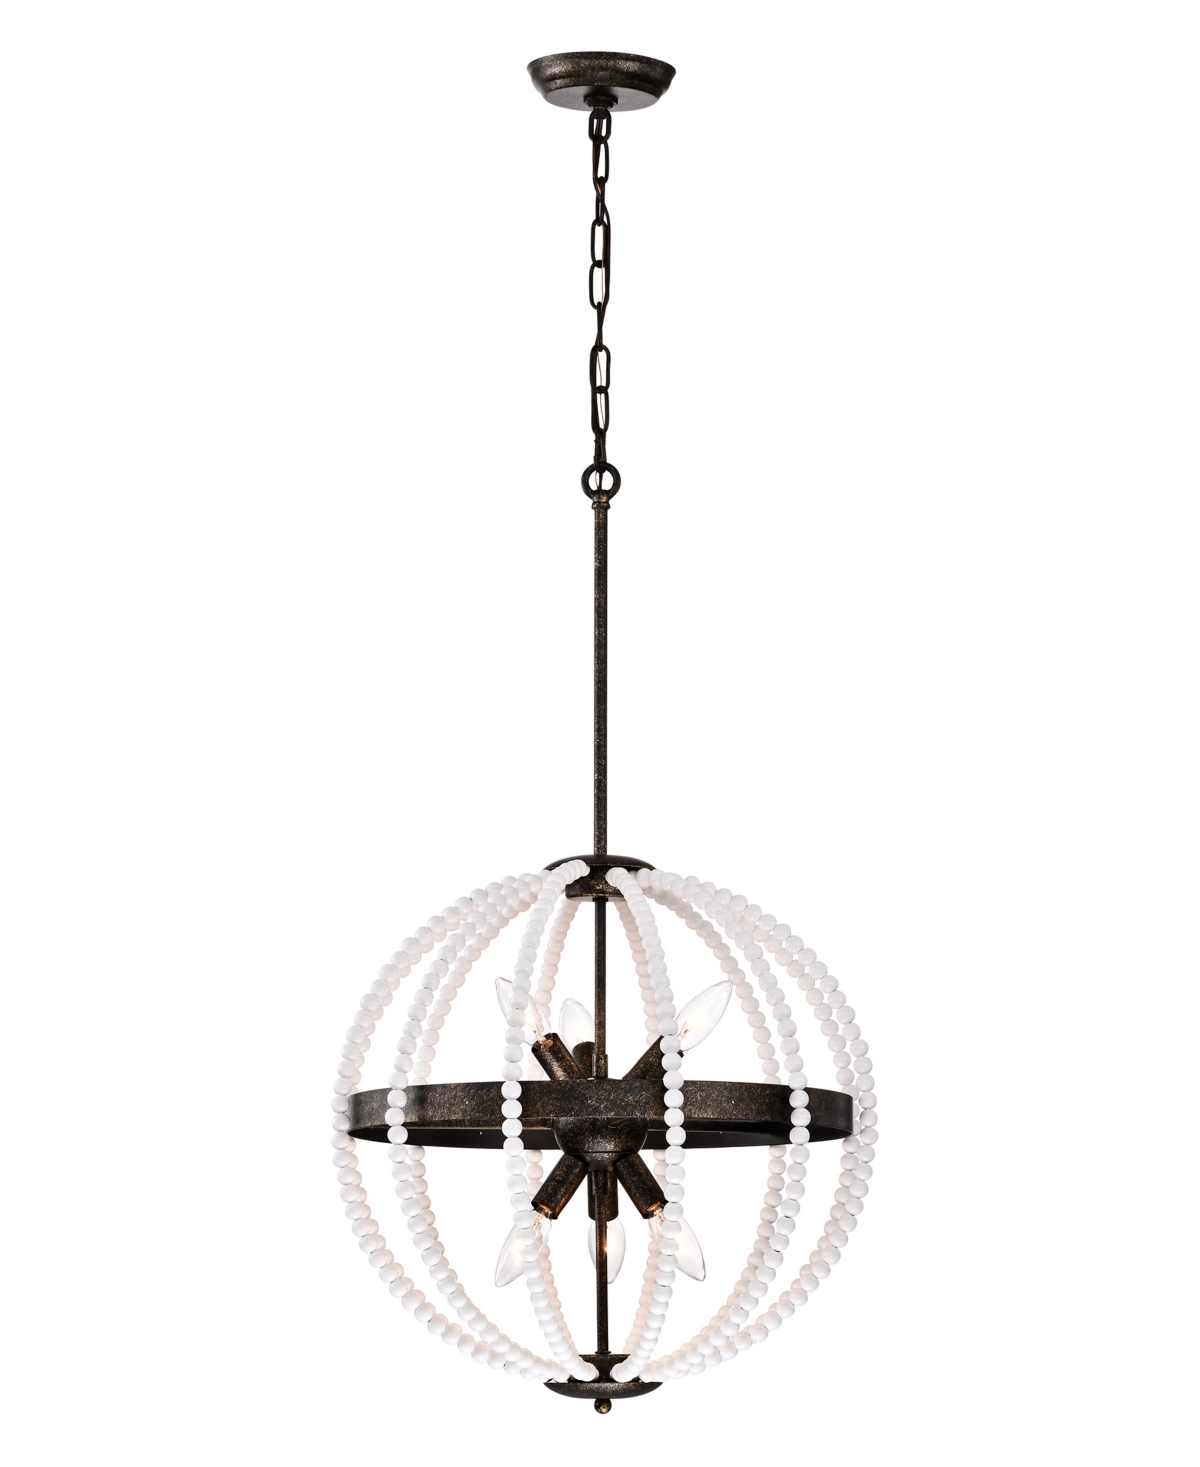 Home Accessories Cary 19" Indoor Finish Chandelier With Light Kit In White And Rustic Black